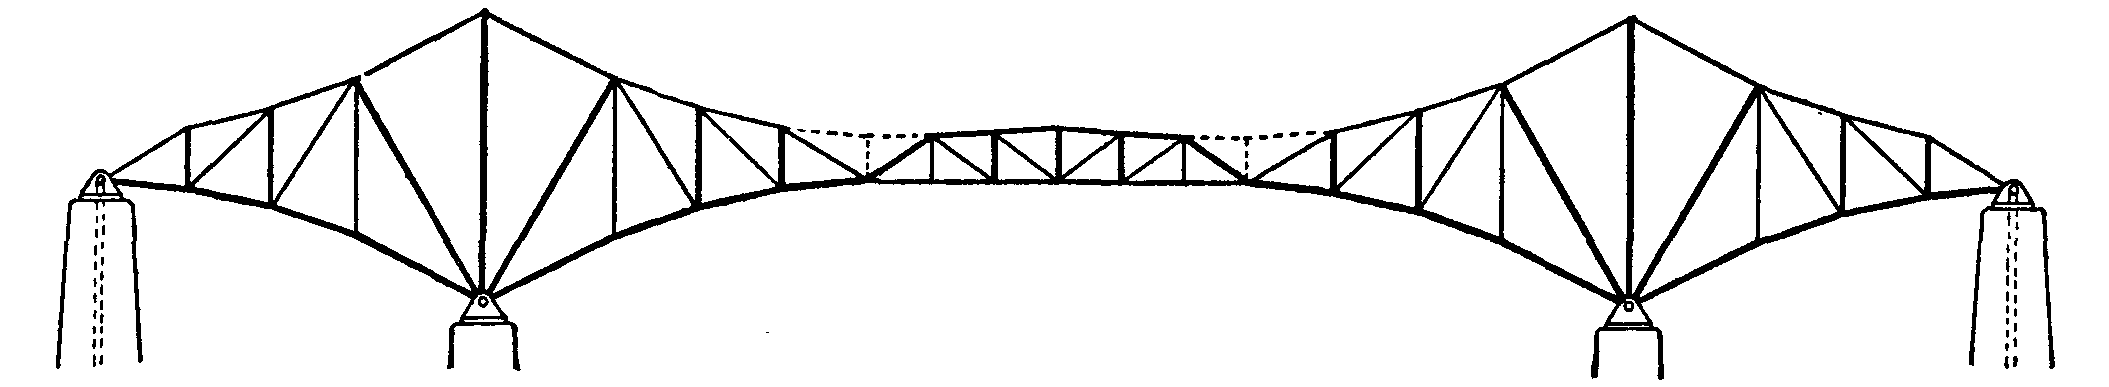 Fig. 21.--Typical Cantilever Bridge.